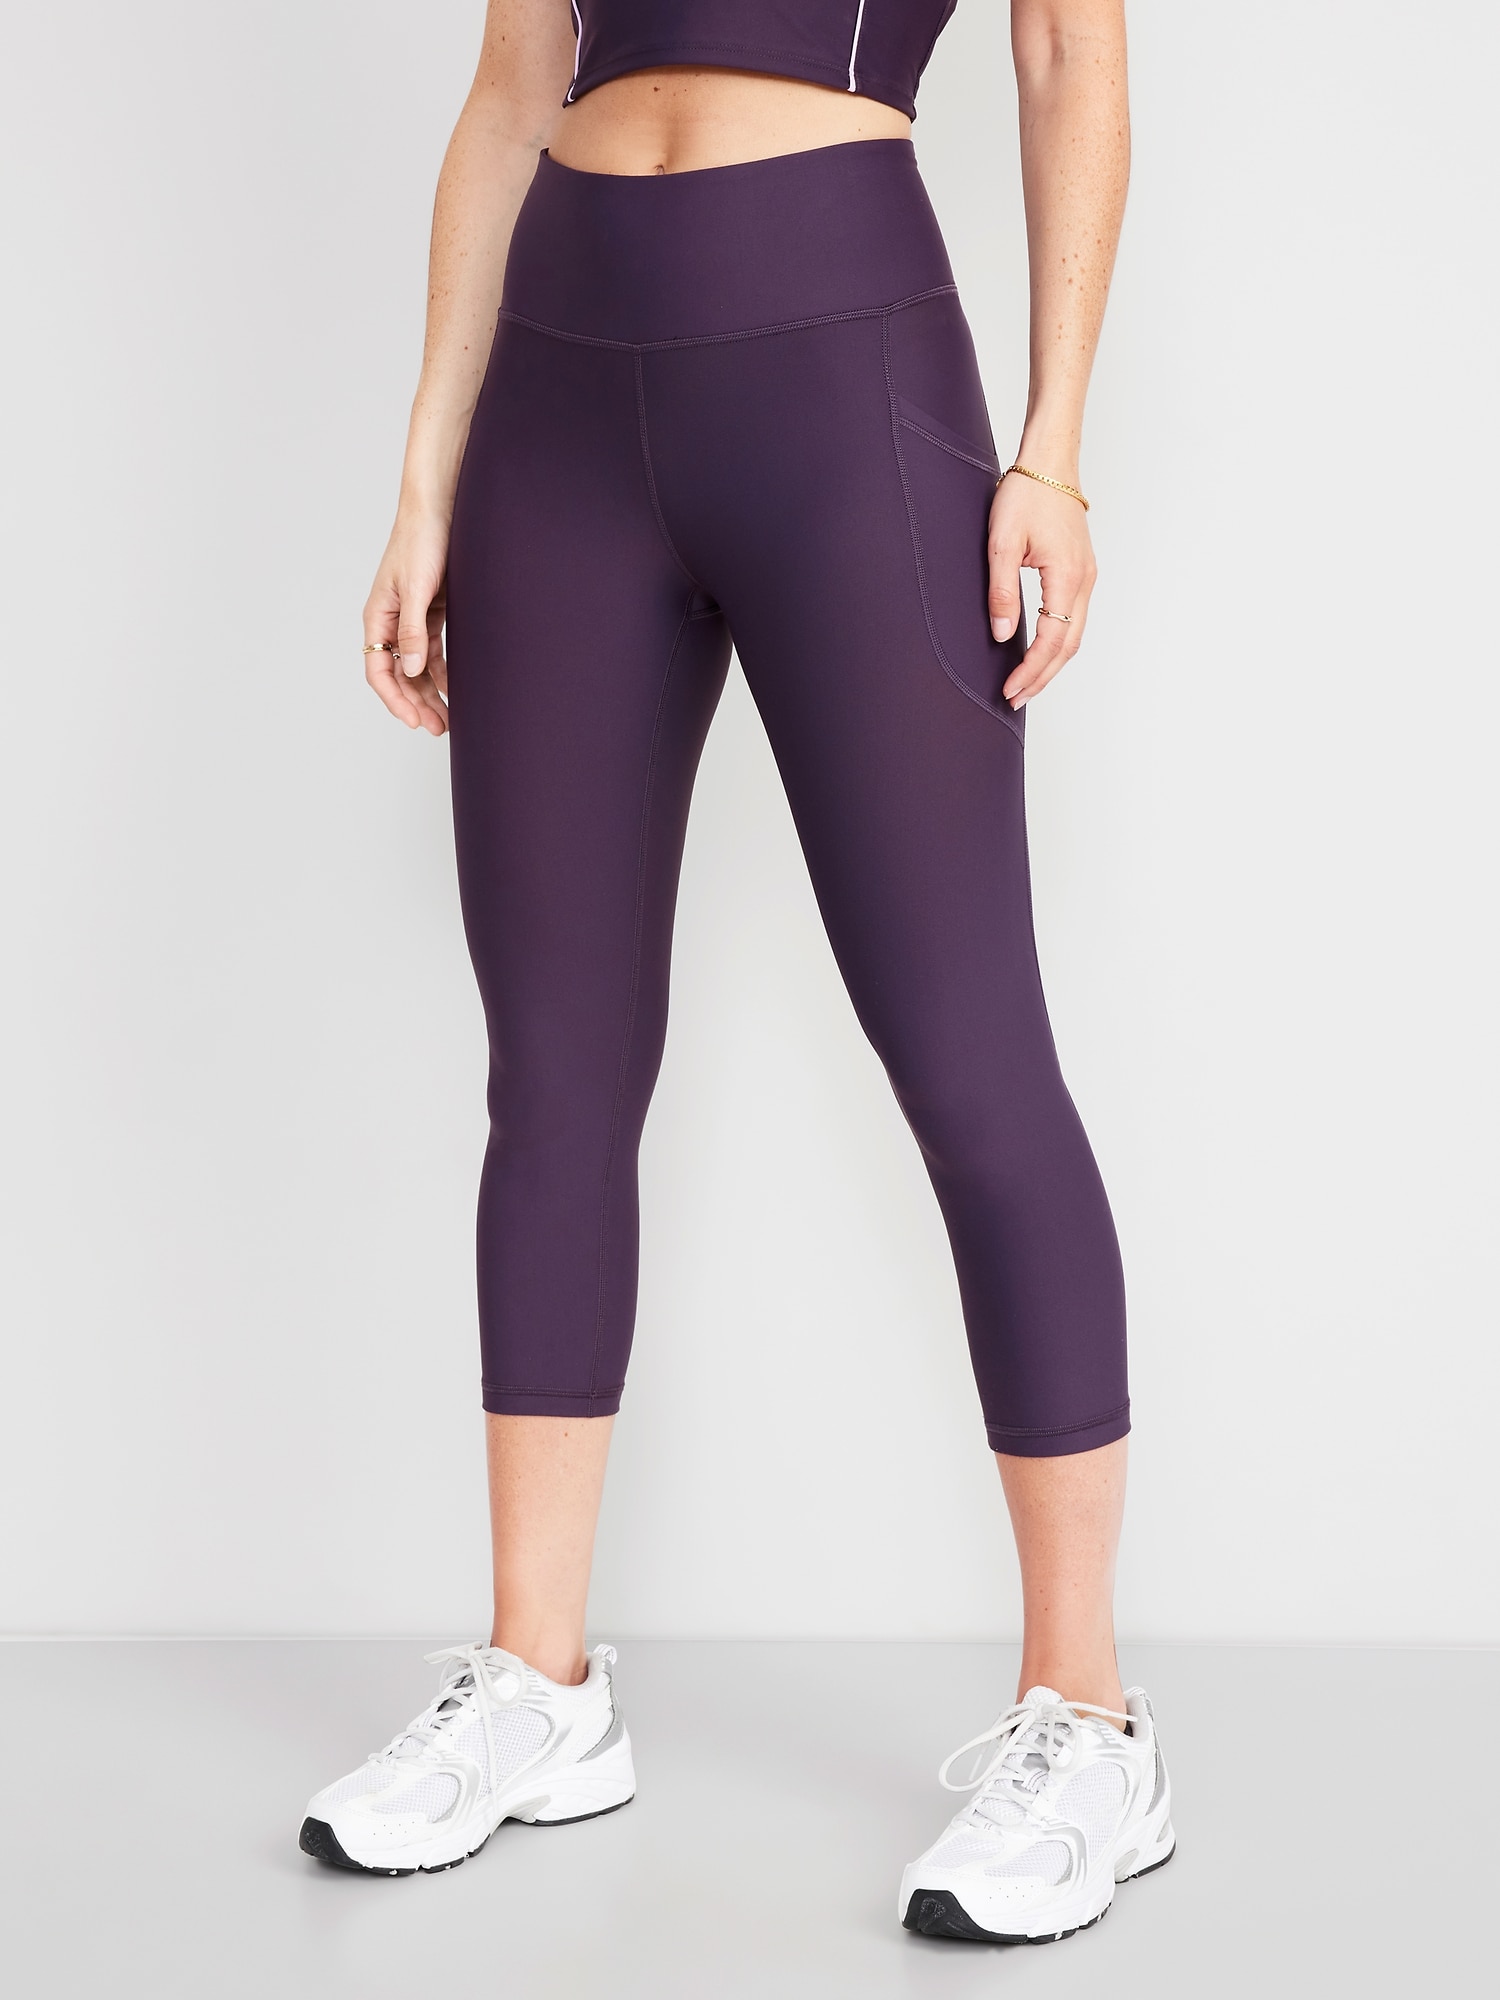 Old Navy - High-Waisted PowerSoft Crop Leggings for Women brown